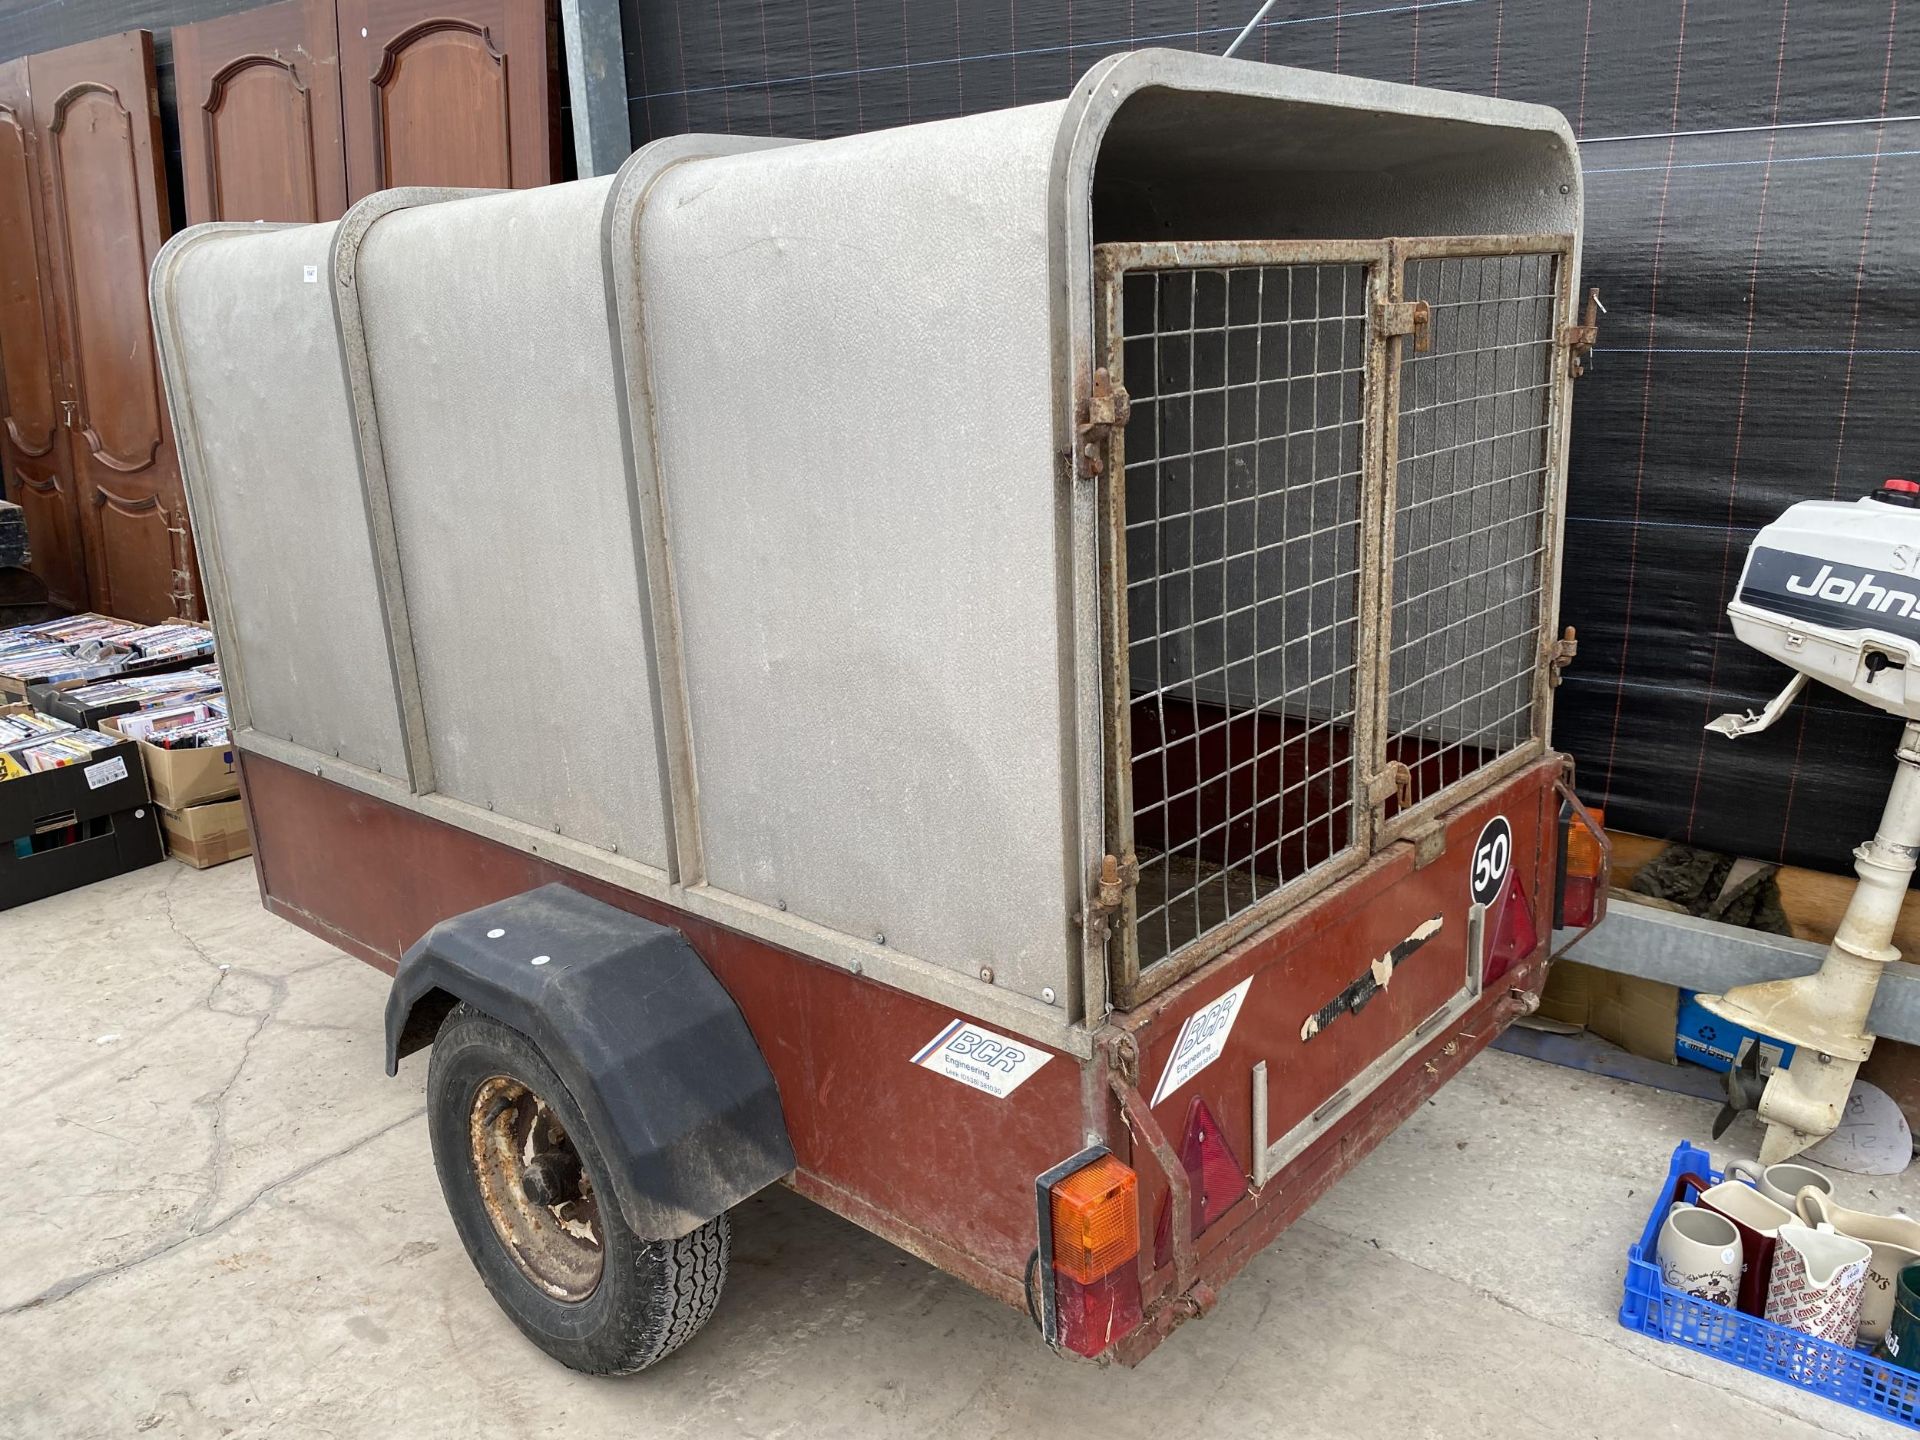 A 6FT BCR CAR TRAILER WITH ANIMAL TRANSPORTER TOP - Image 2 of 8